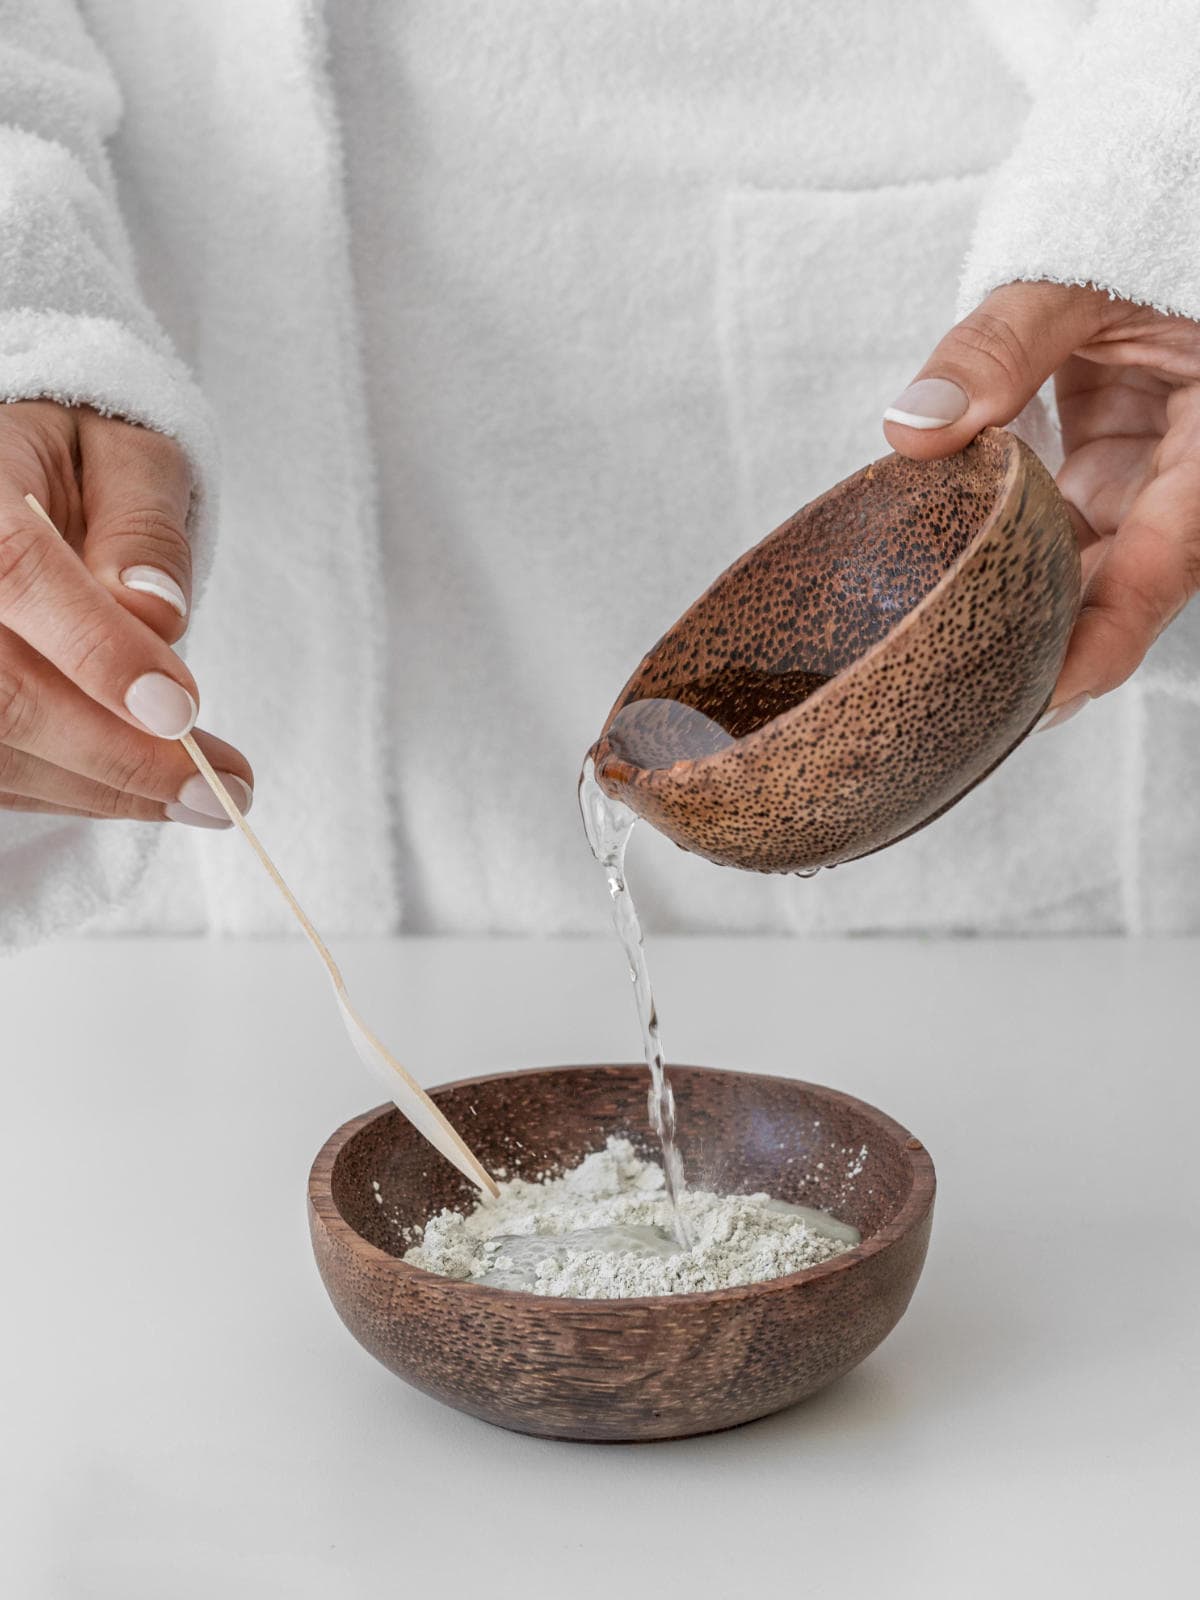 pouring a liquid into a bowl of powdered French green clay.